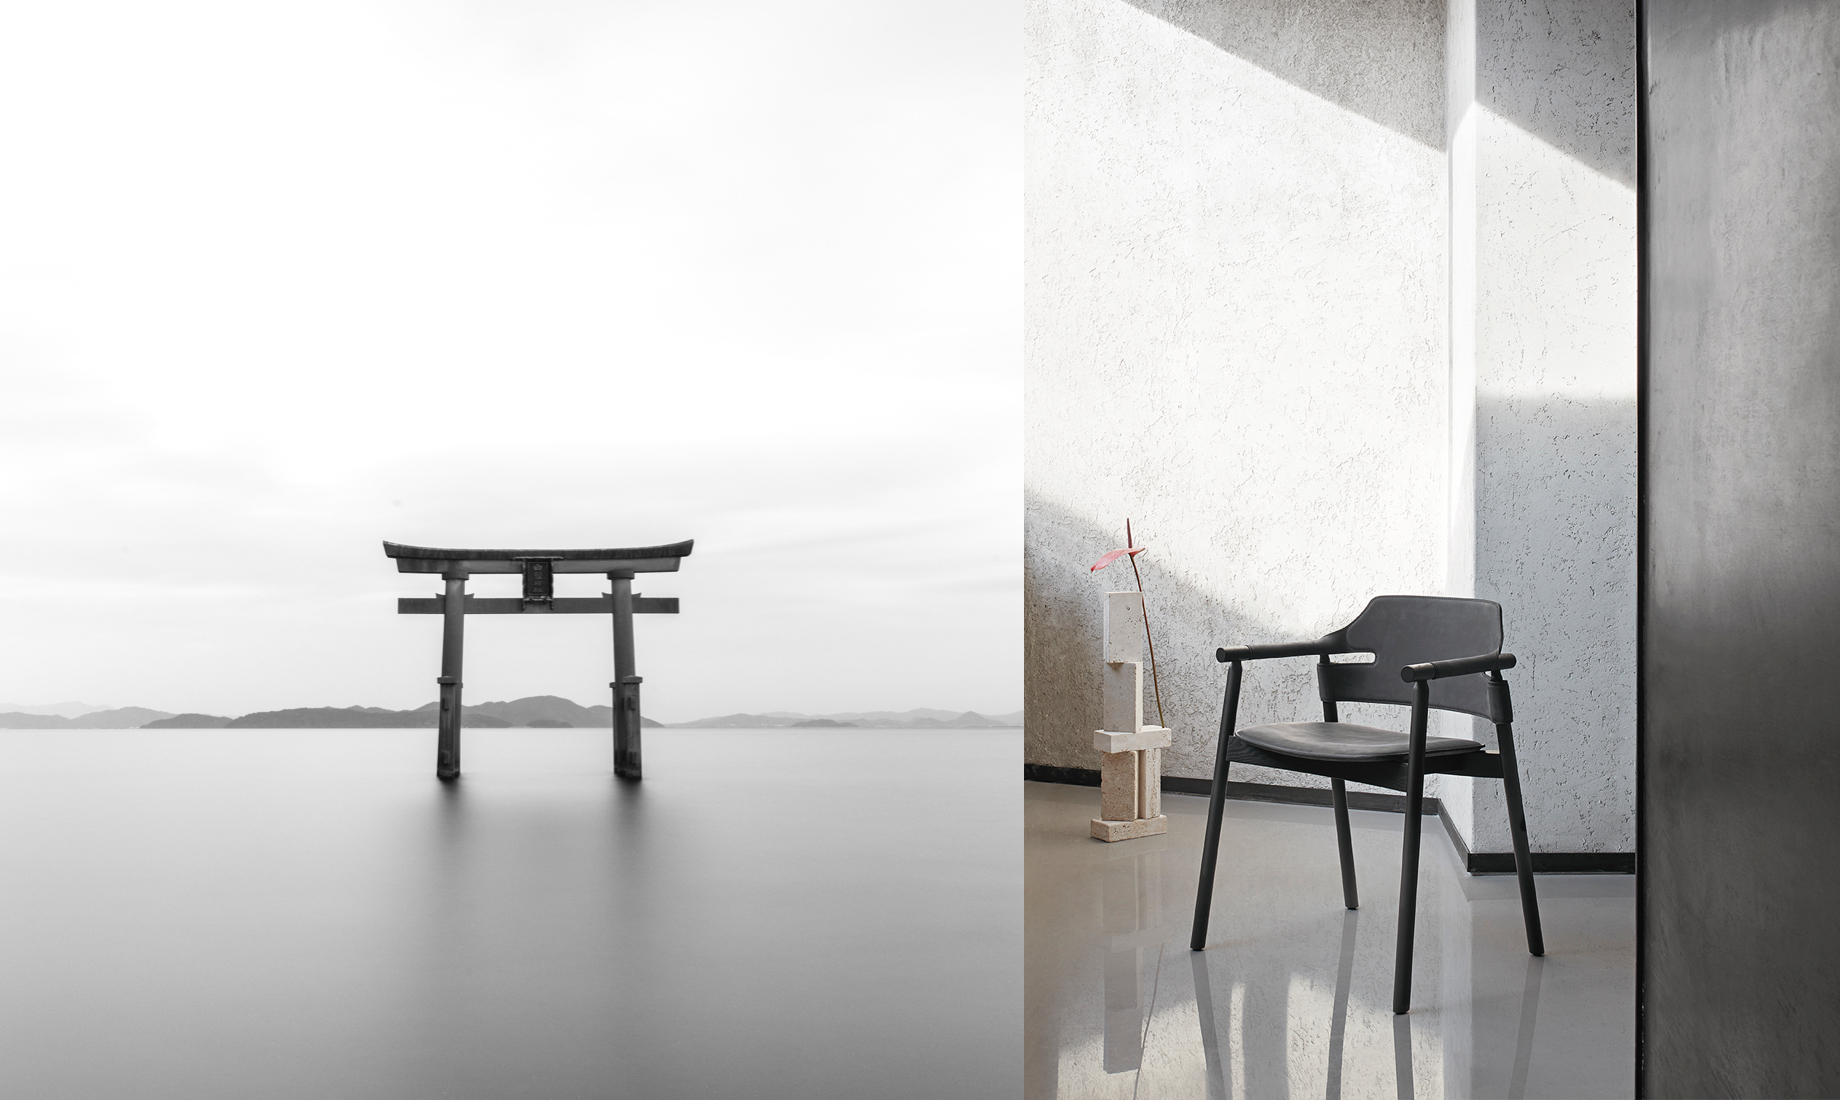 On the left the traditional Japanese Torii, on the right our Suite armchair, design AtelierNanni.